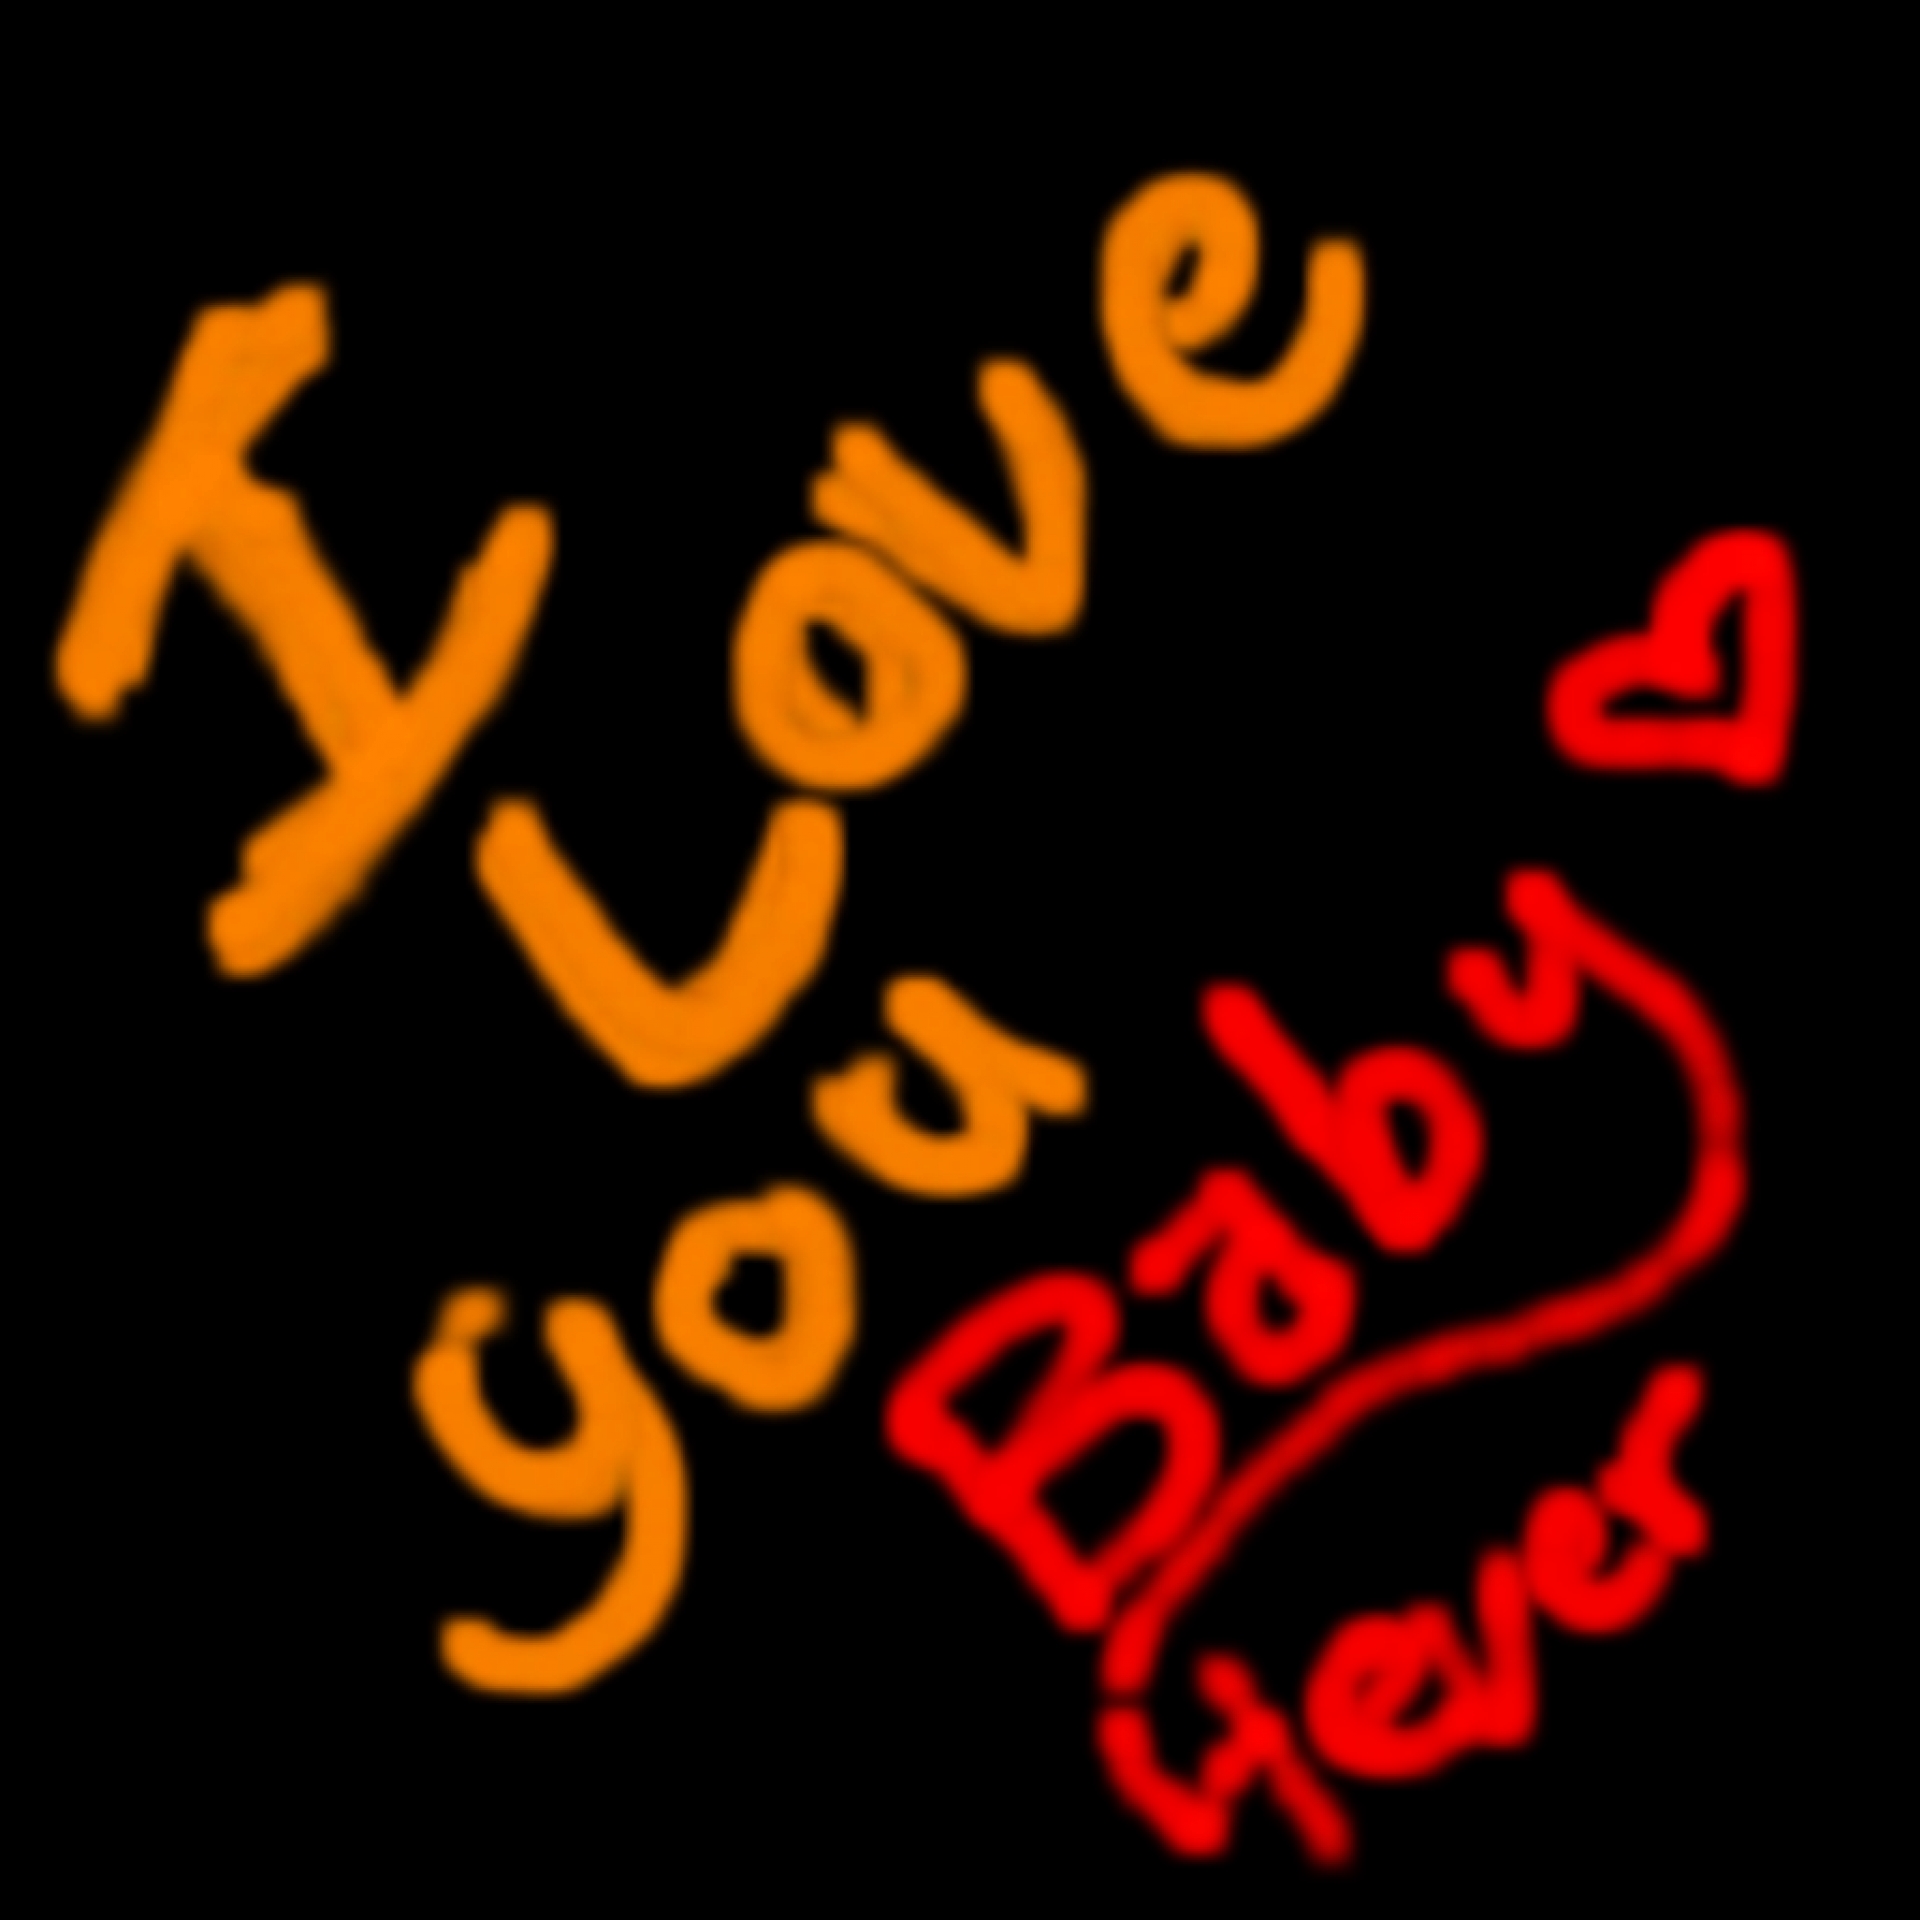 I Love You Baby Logo Quotes iPhone 7 Wallpapers HD gt Love